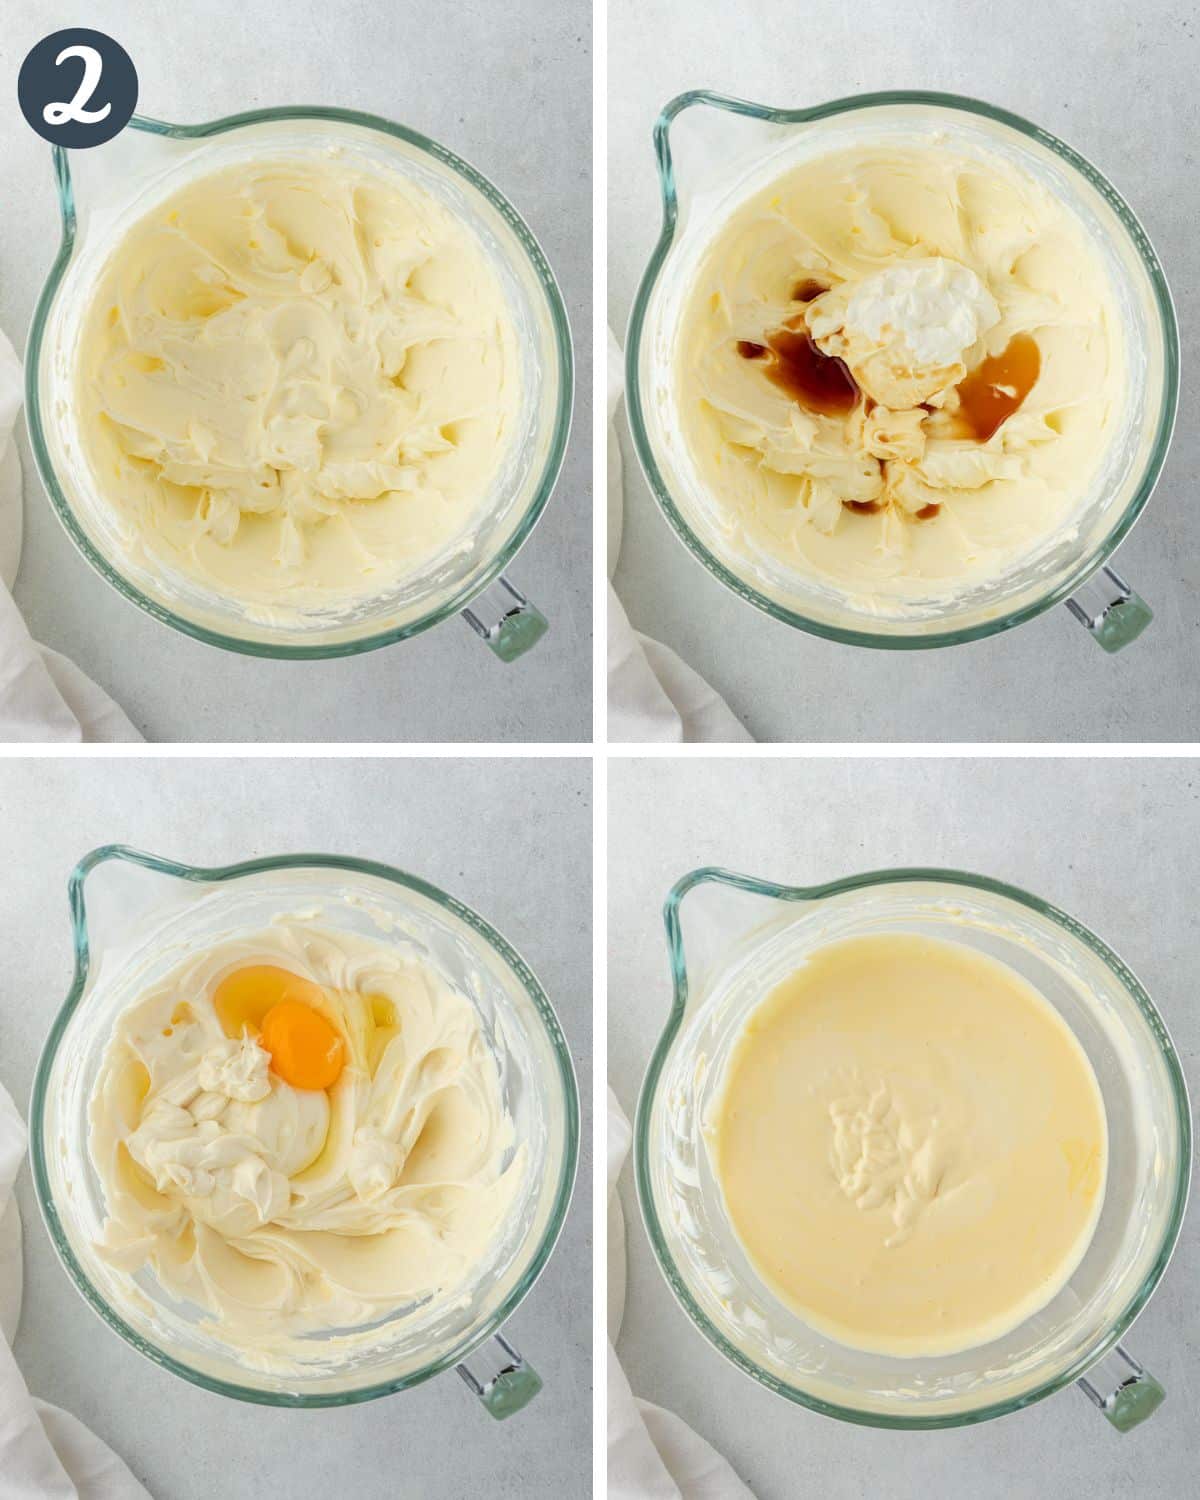 4 images showing the cheesecake filling in various stages of preparation.